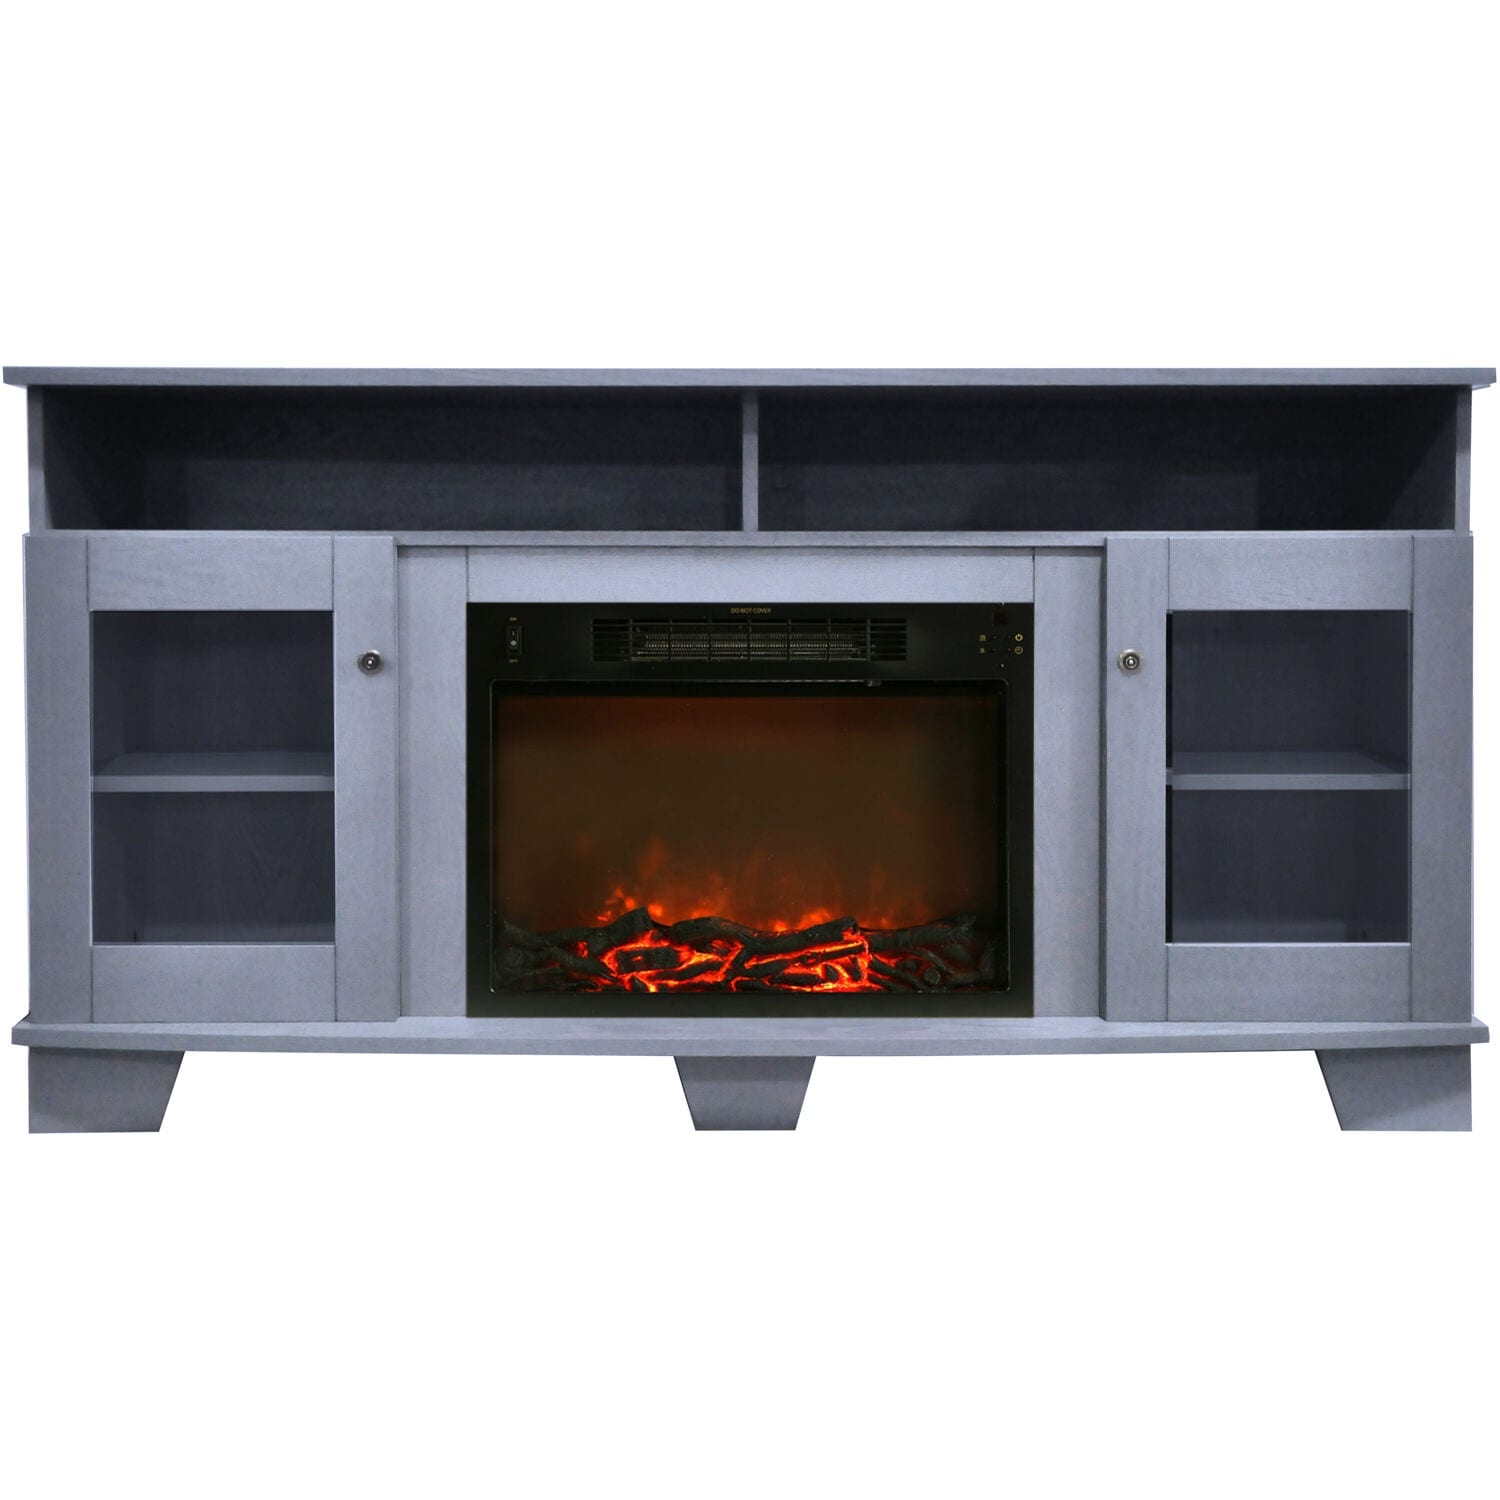 Hanover Glenwood 59 In. Electric Fireplace Heater with Charred Log Display and Entertainment Stand in Slate Blue - 59 Inch